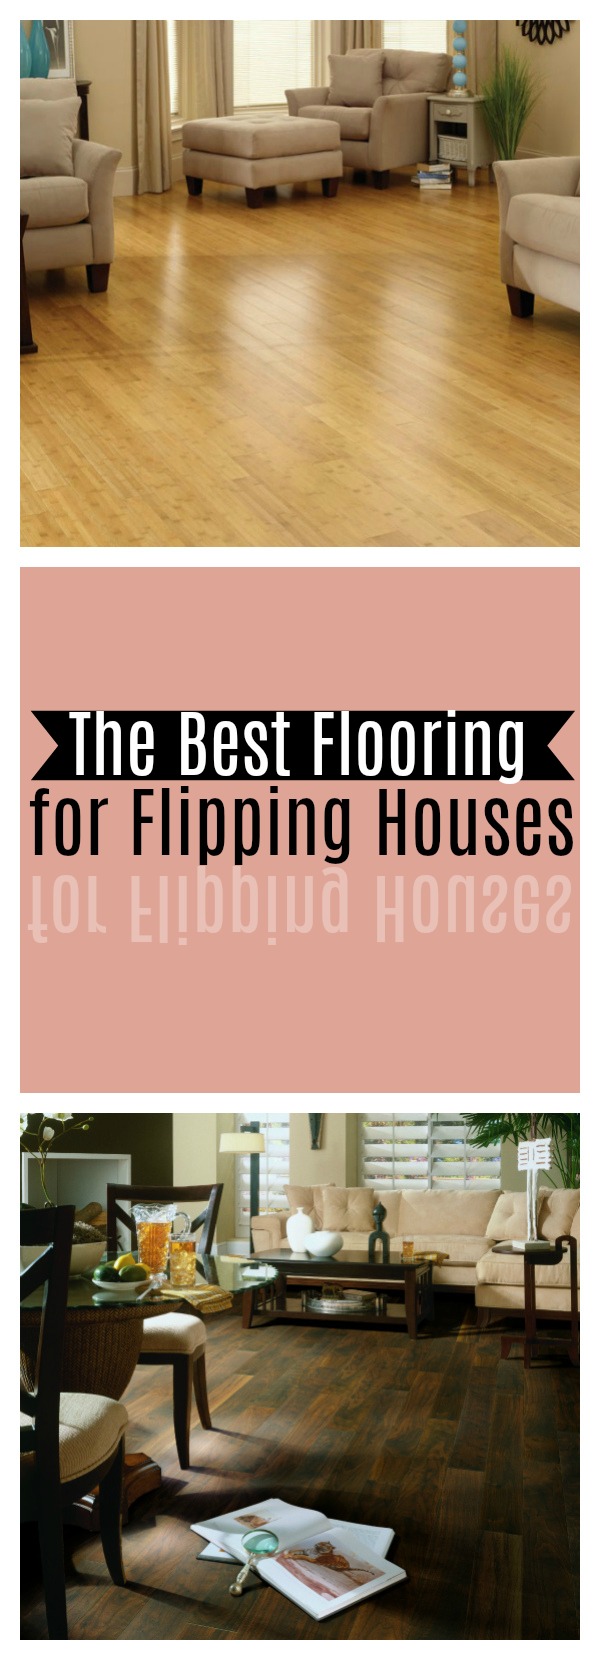 The Best Flooring for Flipping Houses- Want a great ROI? Choose a flooring that looks beautiful and earns you a great return.